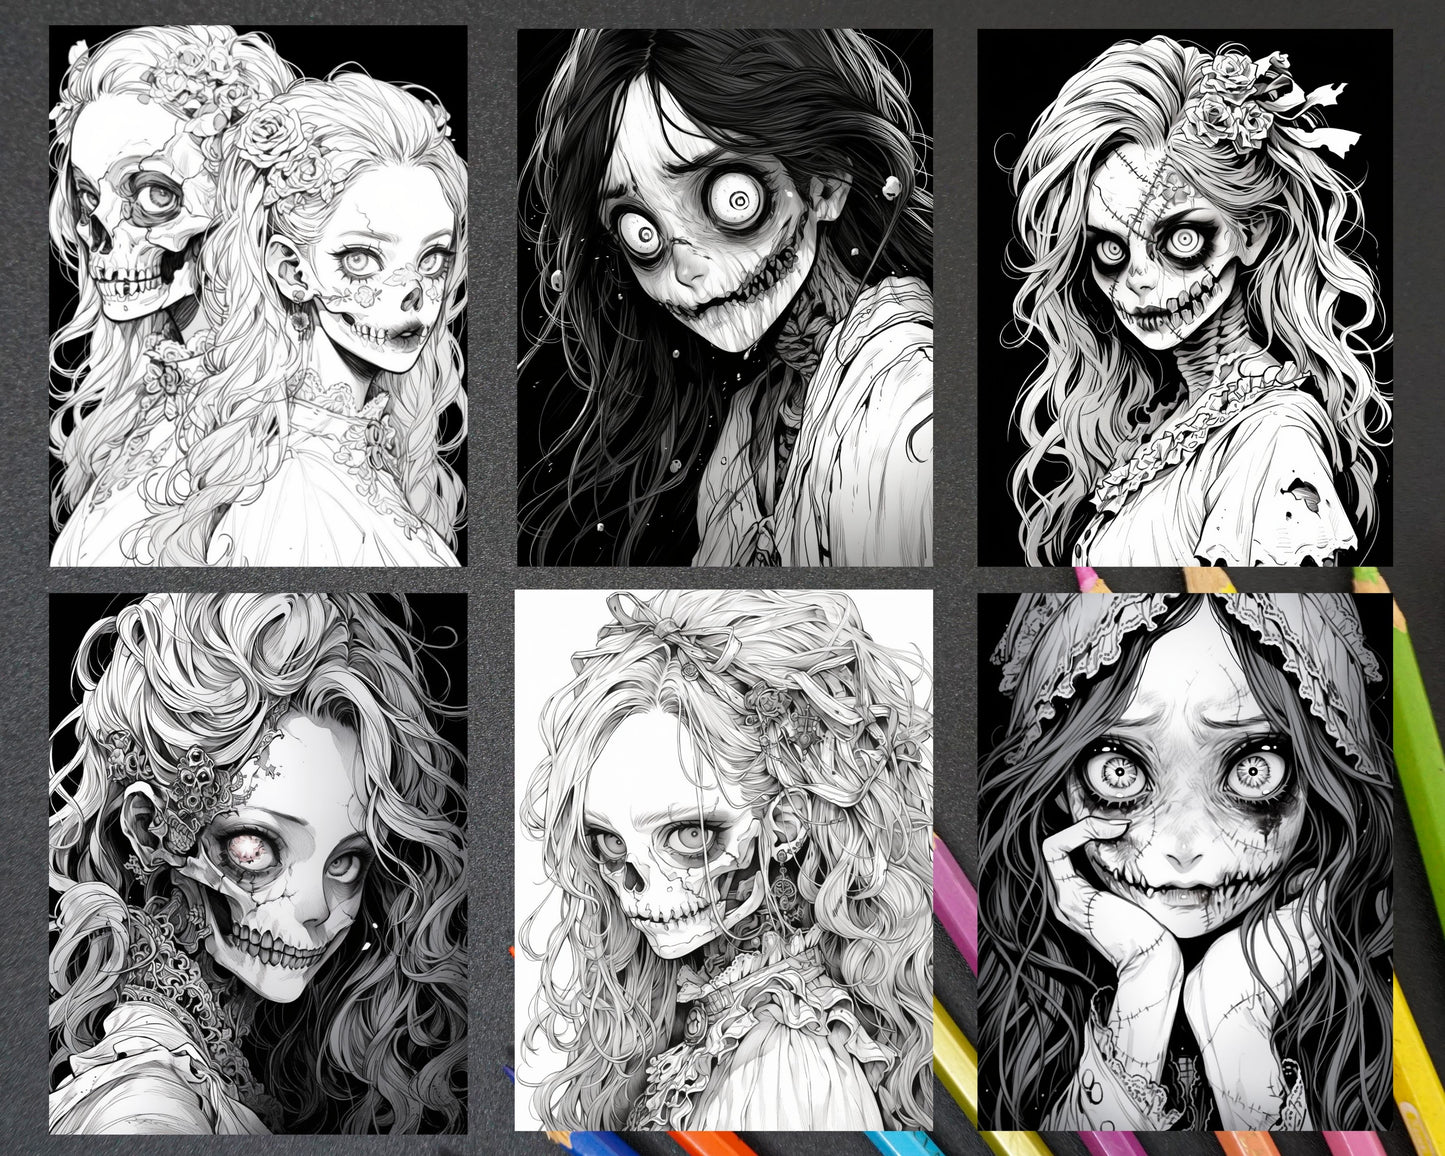 Grayscale Horror Coloring Pages, Adult Printable Coloring Sheets, Printable Gothic Coloring Pages, Mysterious Ladies in Scary Coloring, Horror Coloring Pages, Halloween Coloring Pages, Spooky Coloring Pages, October Coloring pages, Halloween Grayscale Coloring Pages, Halloween Coloring Sheets